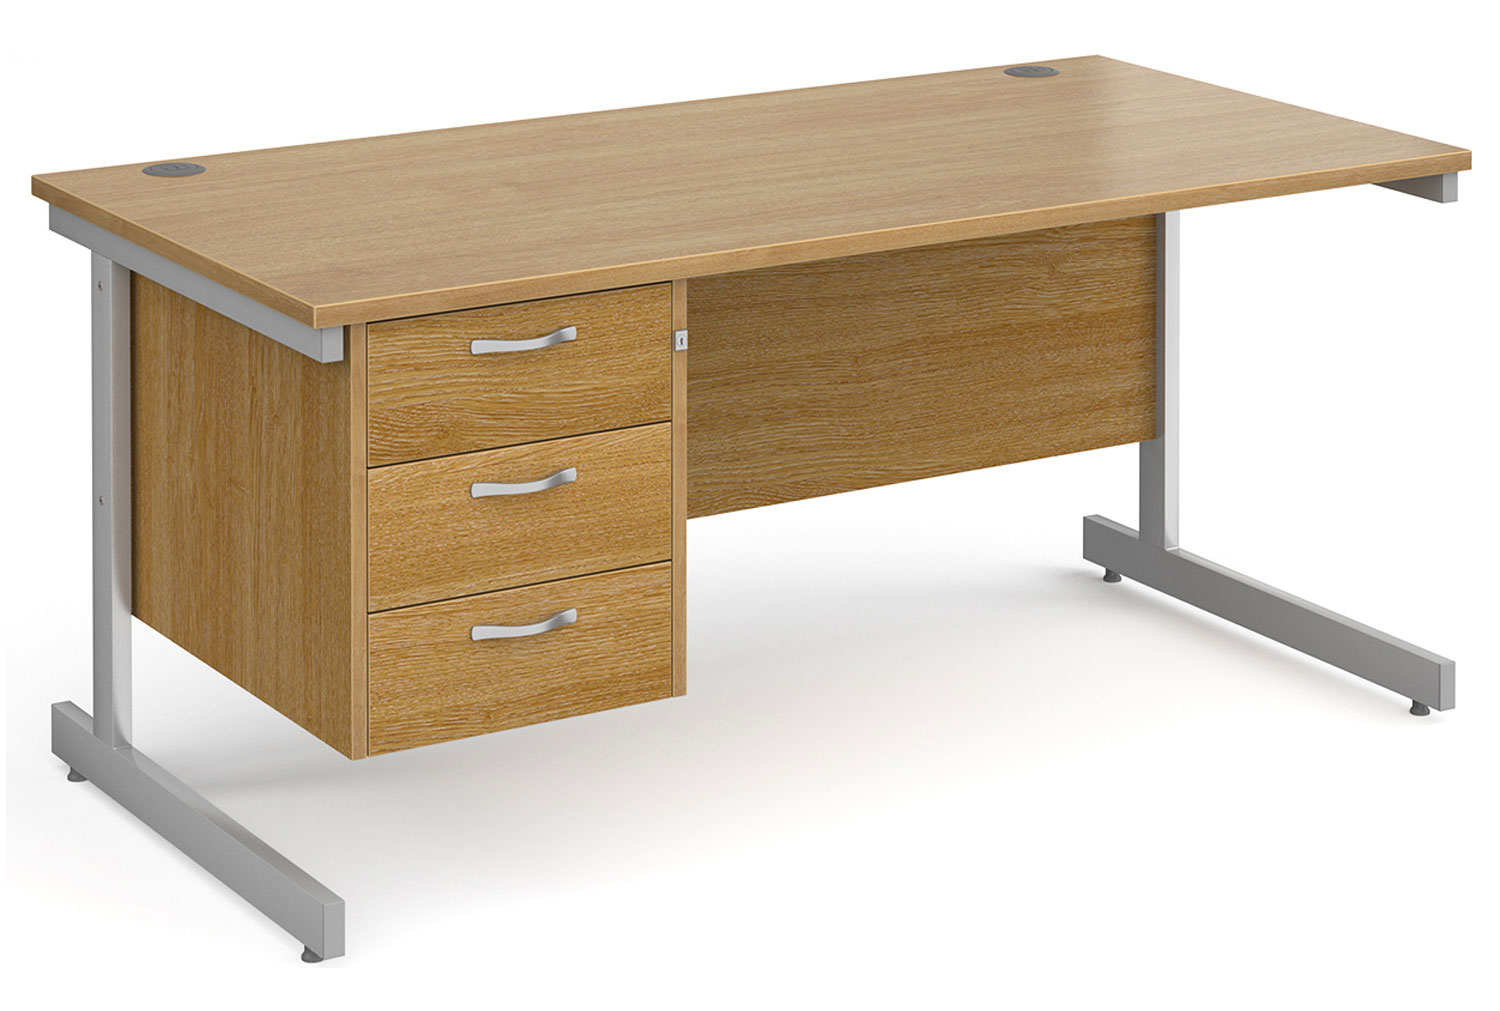 Thrifty Next-Day Rectangular Office Desk 3 Drawers Oak, 160wx80dx73h (cm), Express Delivery